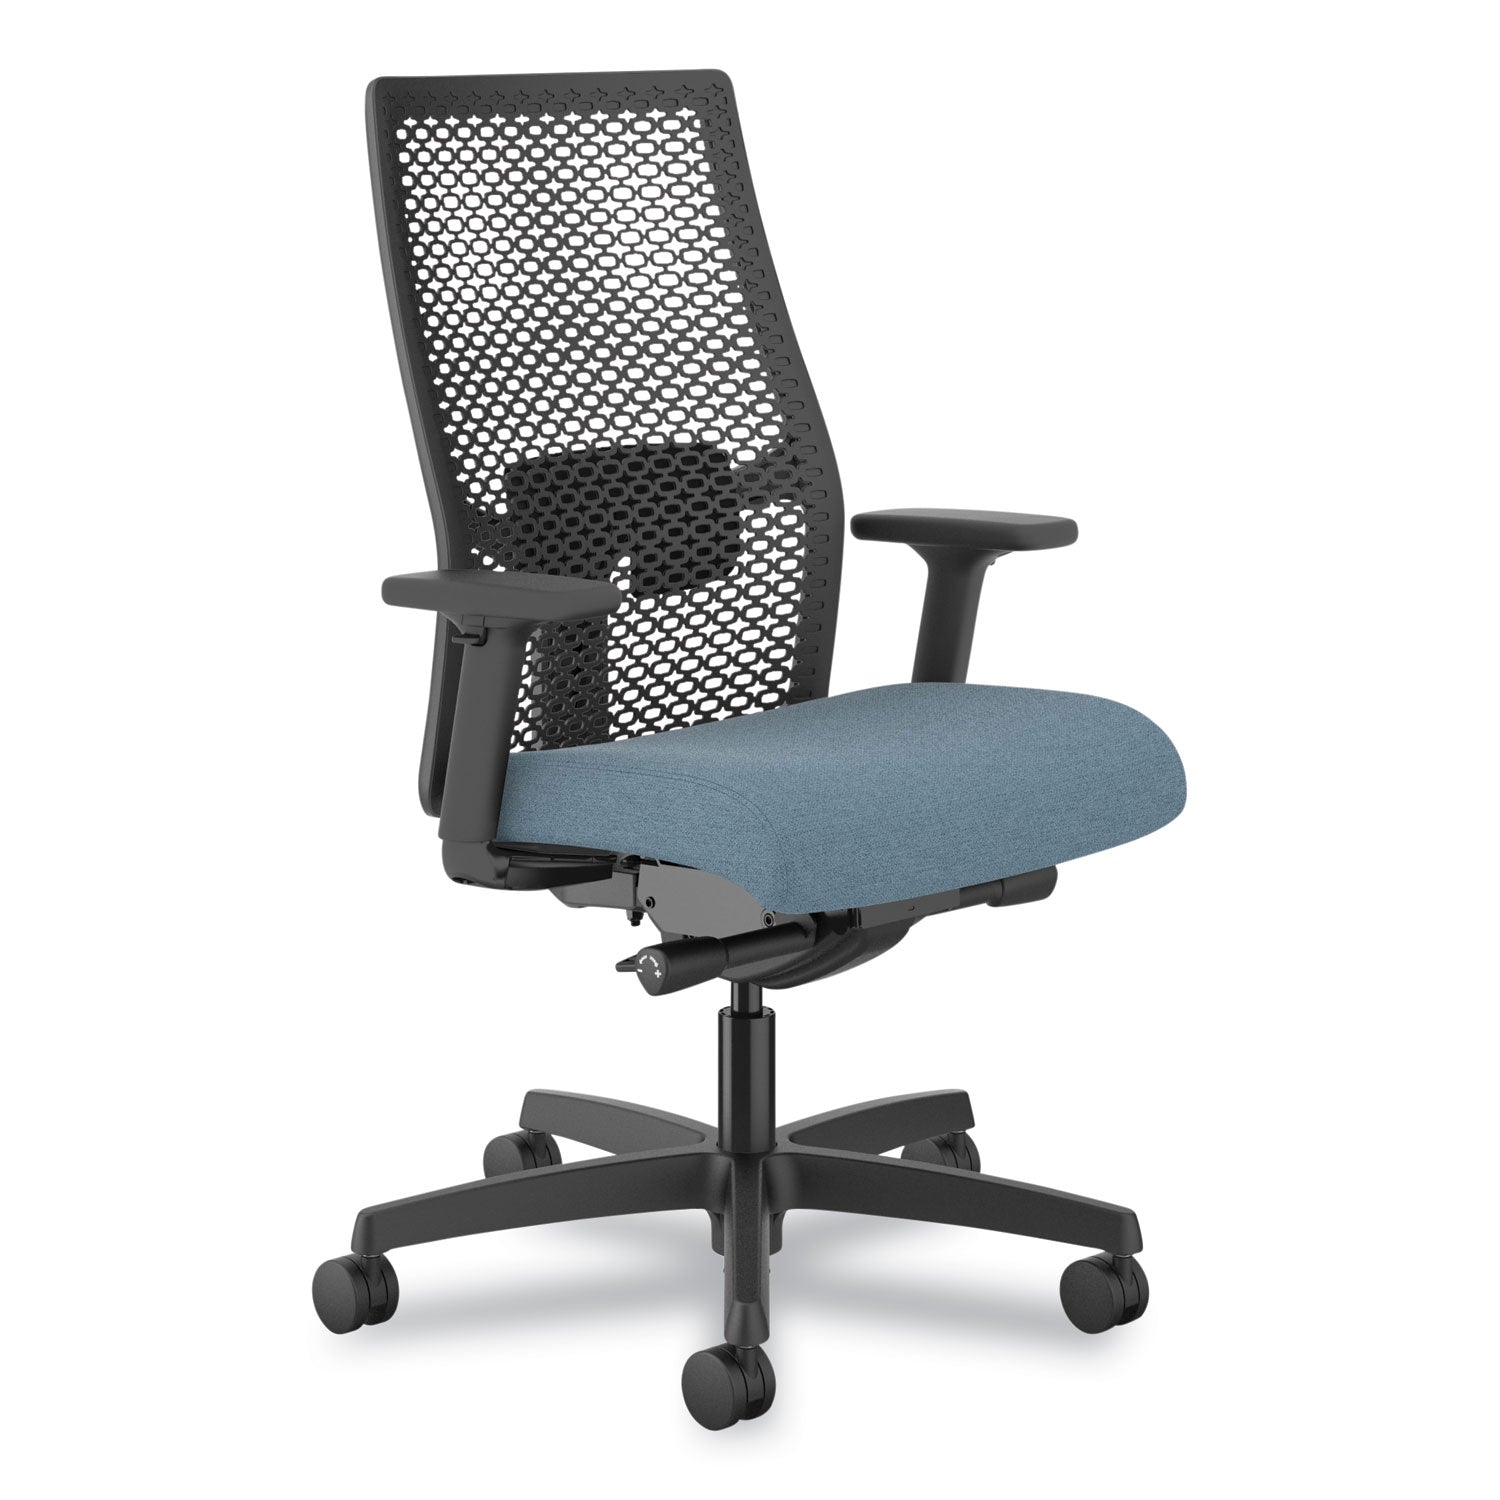 ignition-20-reactiv-mid-back-task-chair-1725-to-2175-seat-height-blue-fabric-seat-black-back-ships-in-7-10-bus-days_honi2mr2ash21nt - 1